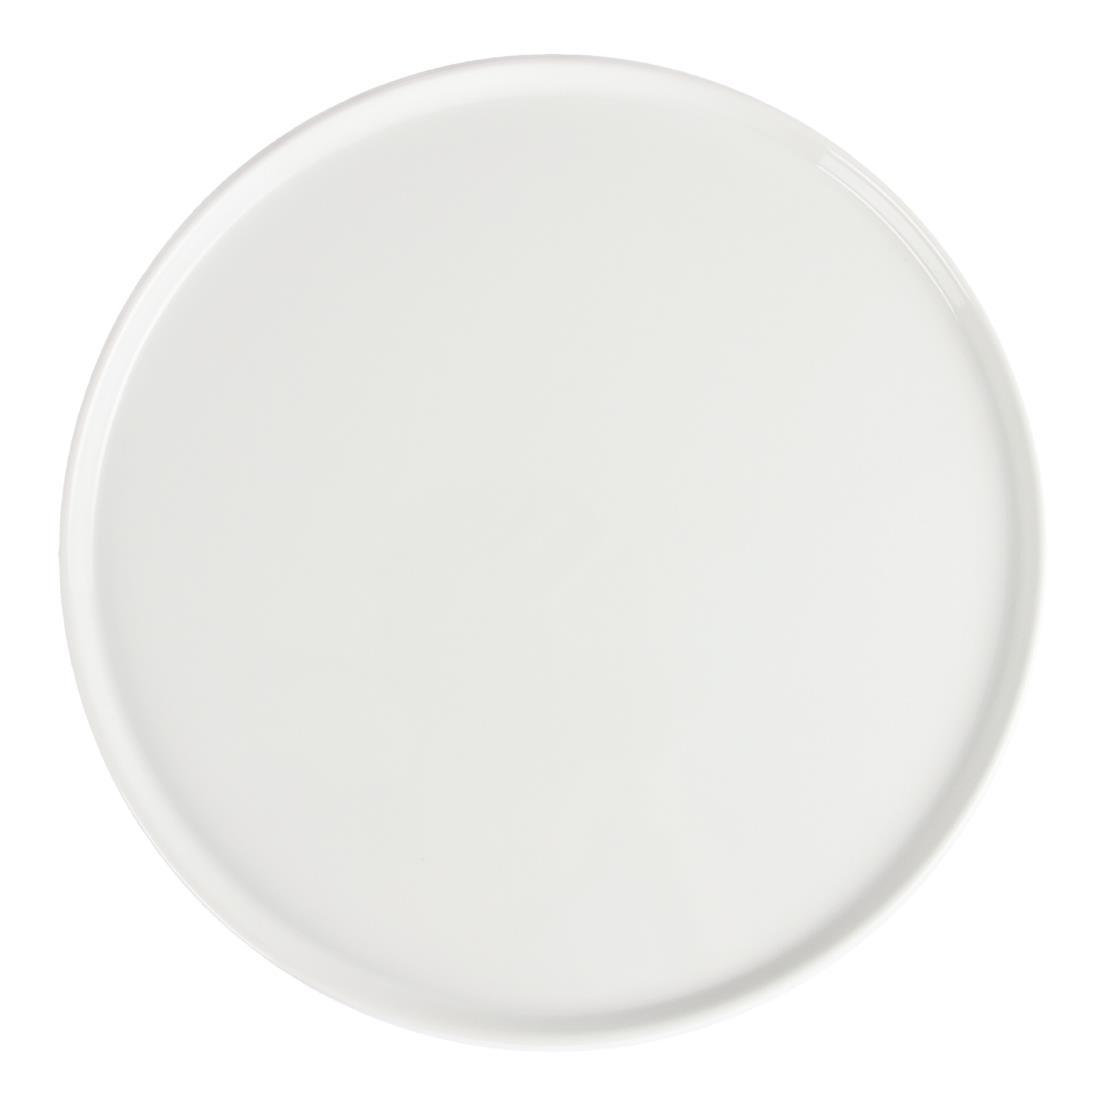 Olympia Whiteware Pizza Plates 330mm (Pack of 4) - CD723  - 3